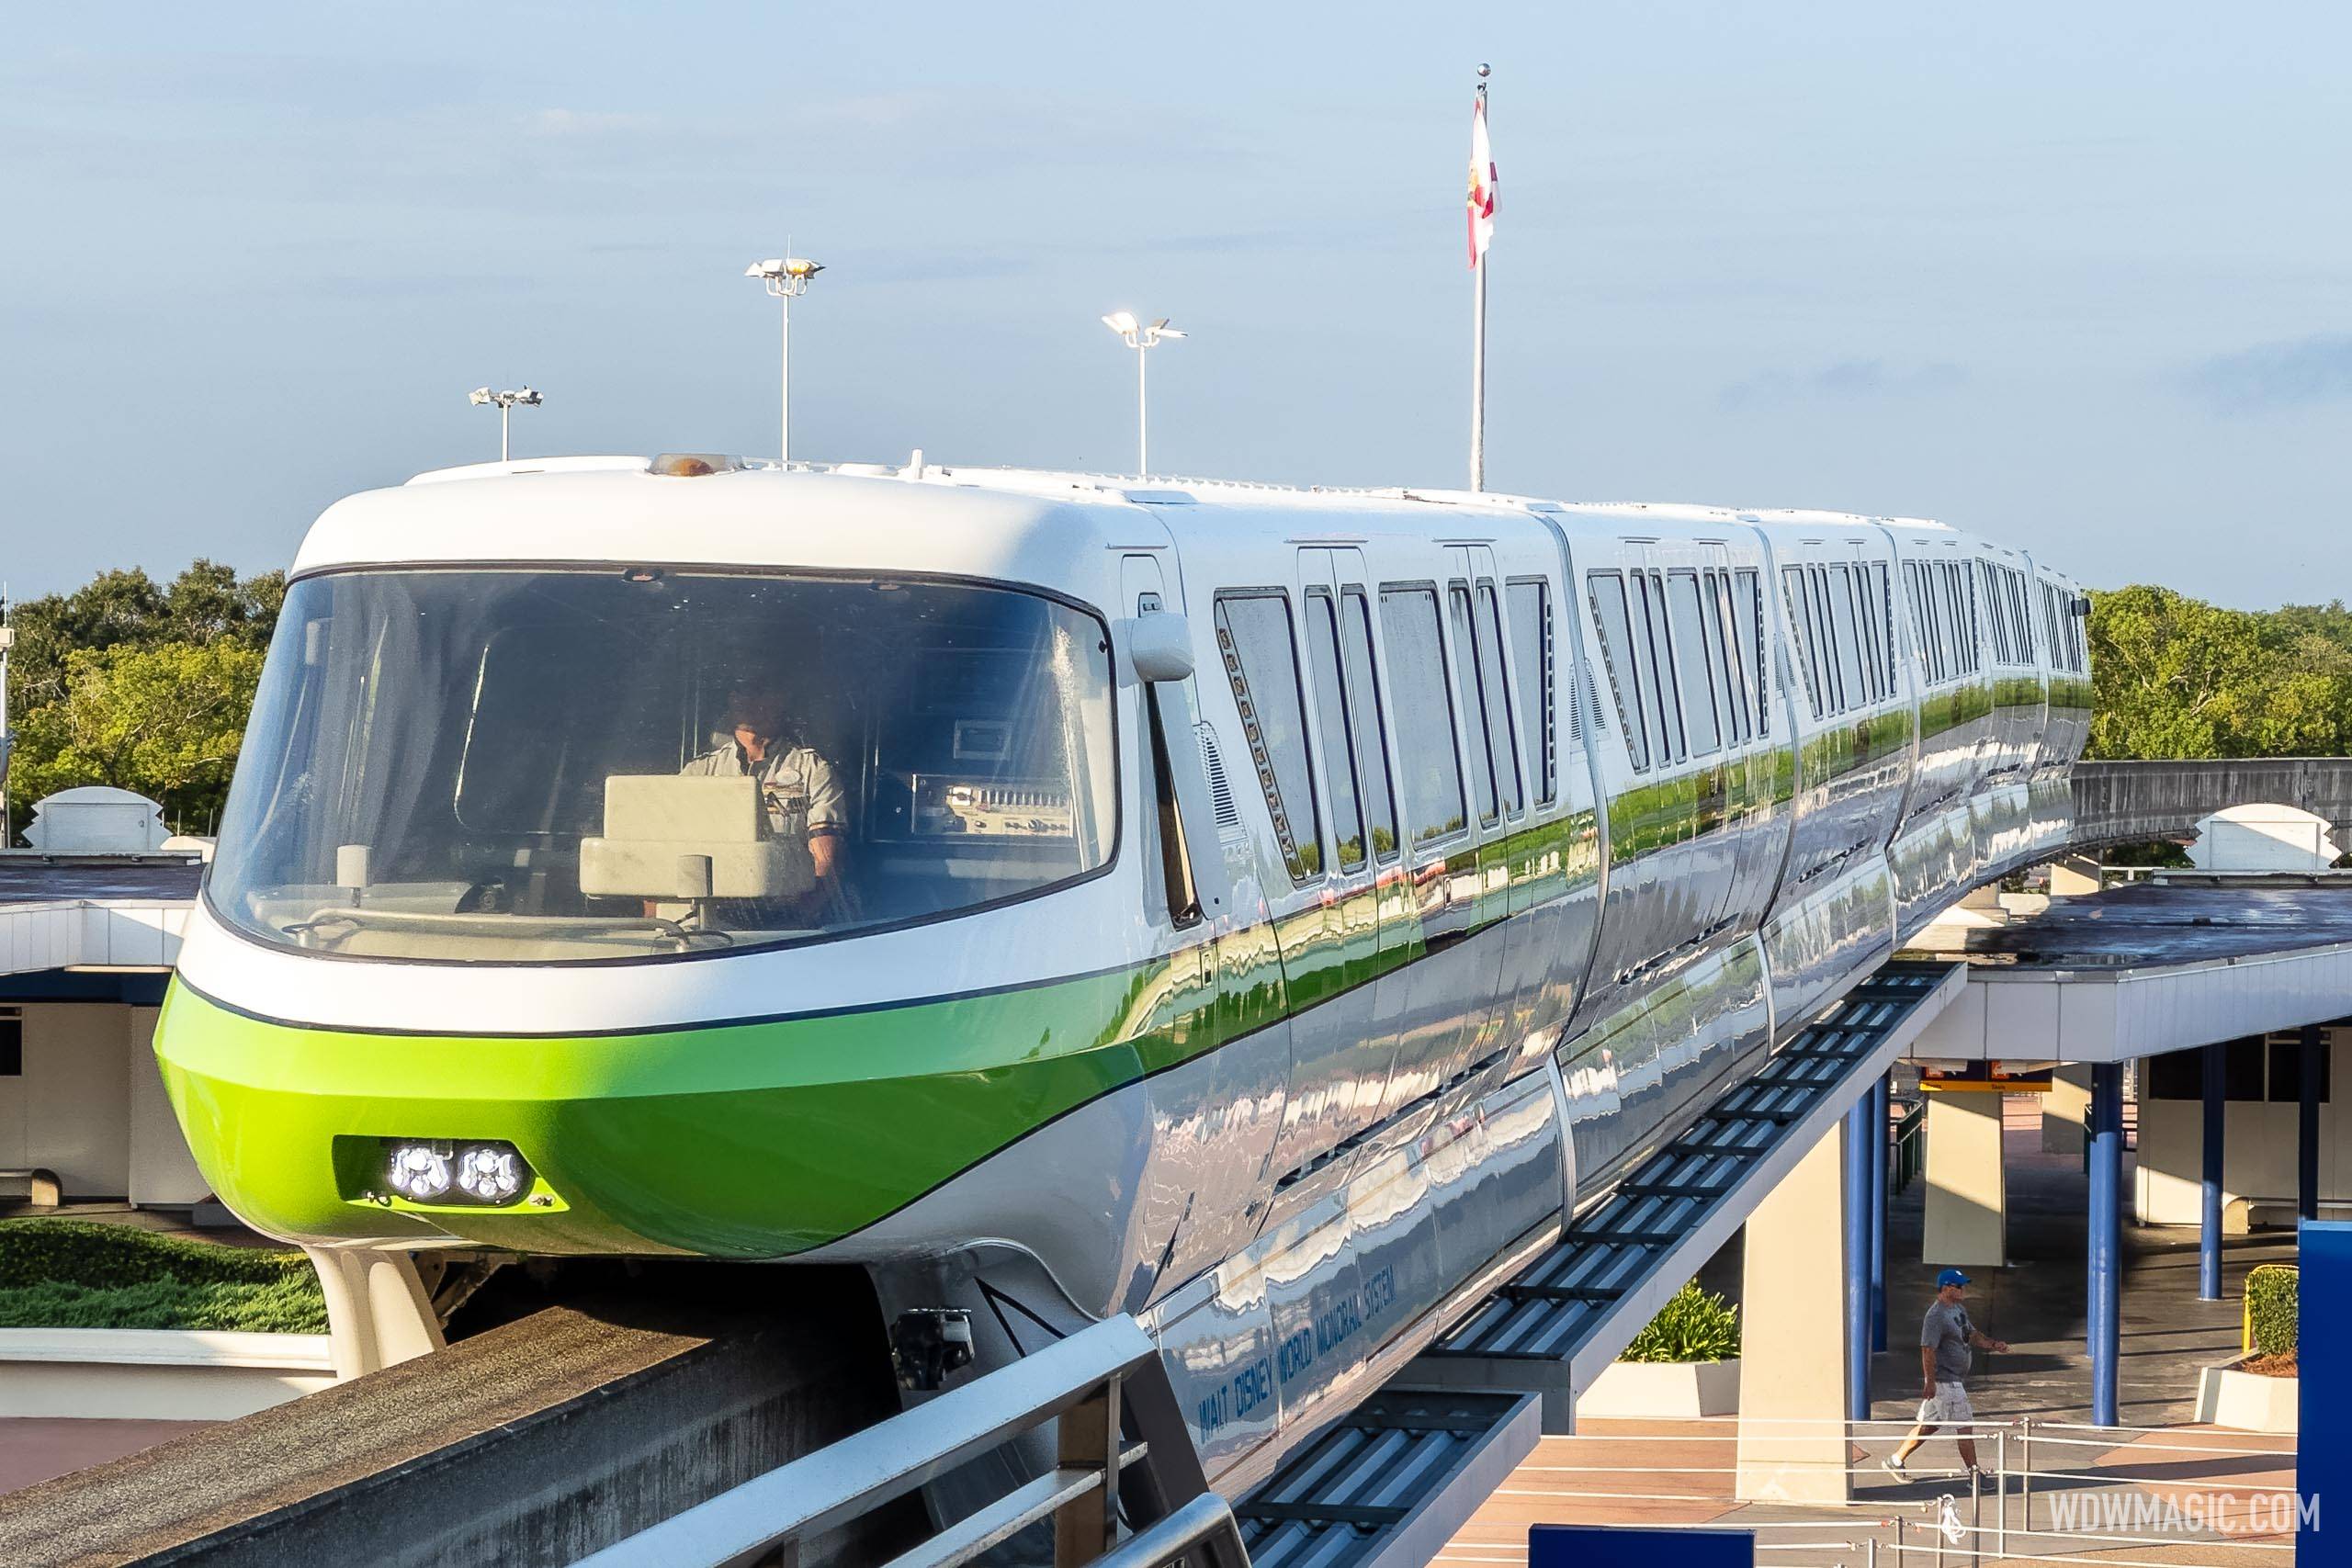 A look at the repainted Monorail Green at Walt Disney World